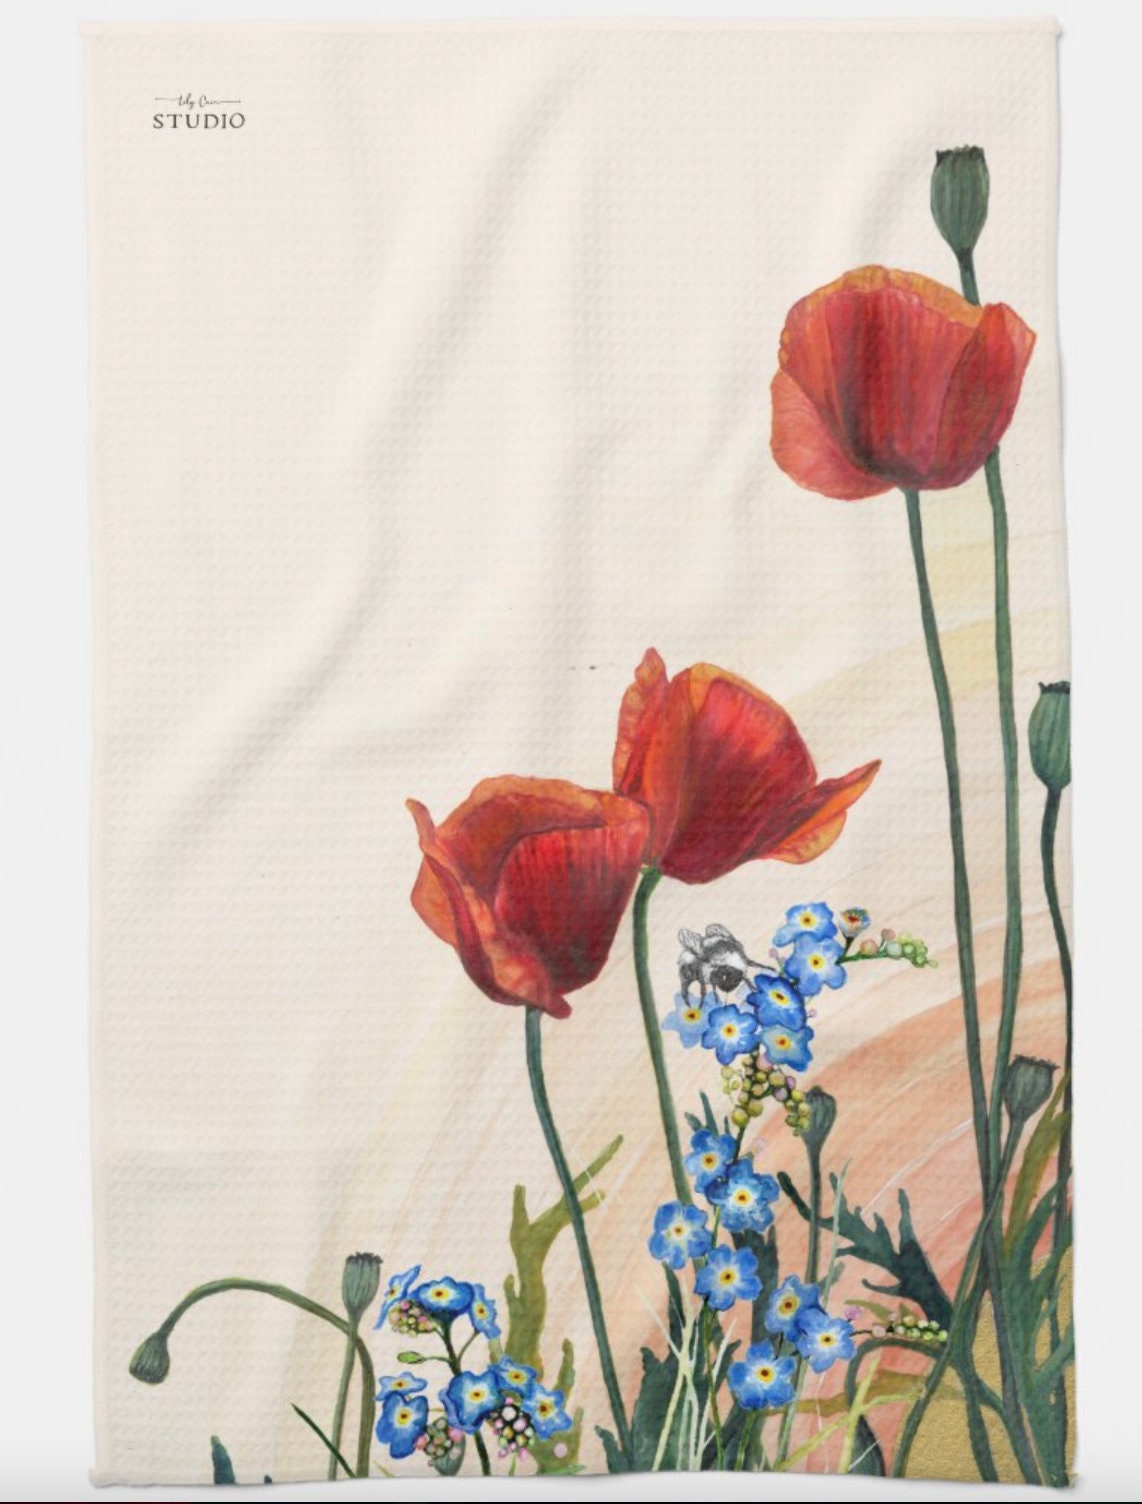 Home Sweet Farmhouse Kitchen Towel - Red Poppy Creations